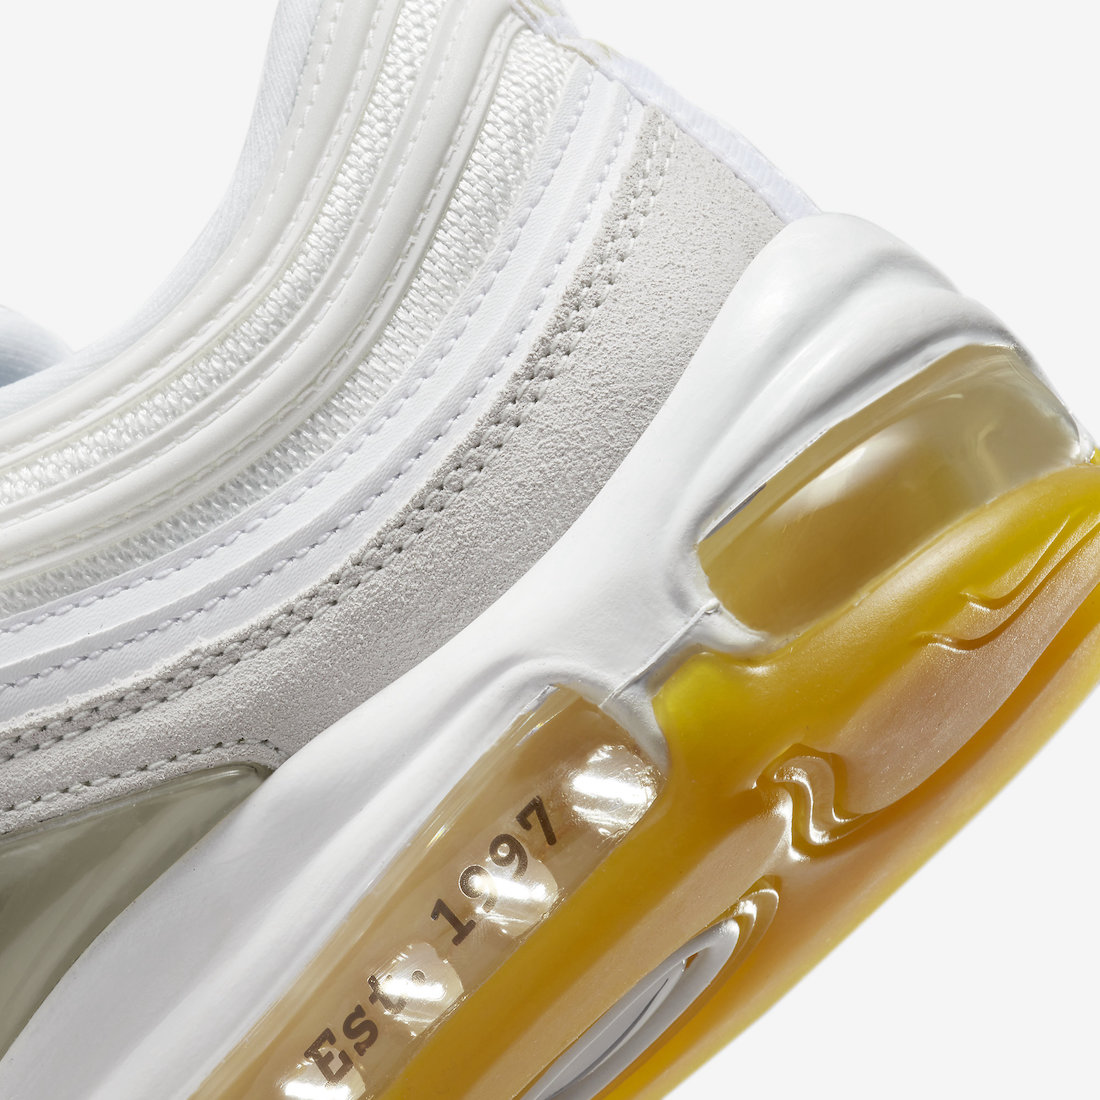 Nike Air Max 97 M Frank Rudy DQ8961-100 Release Date